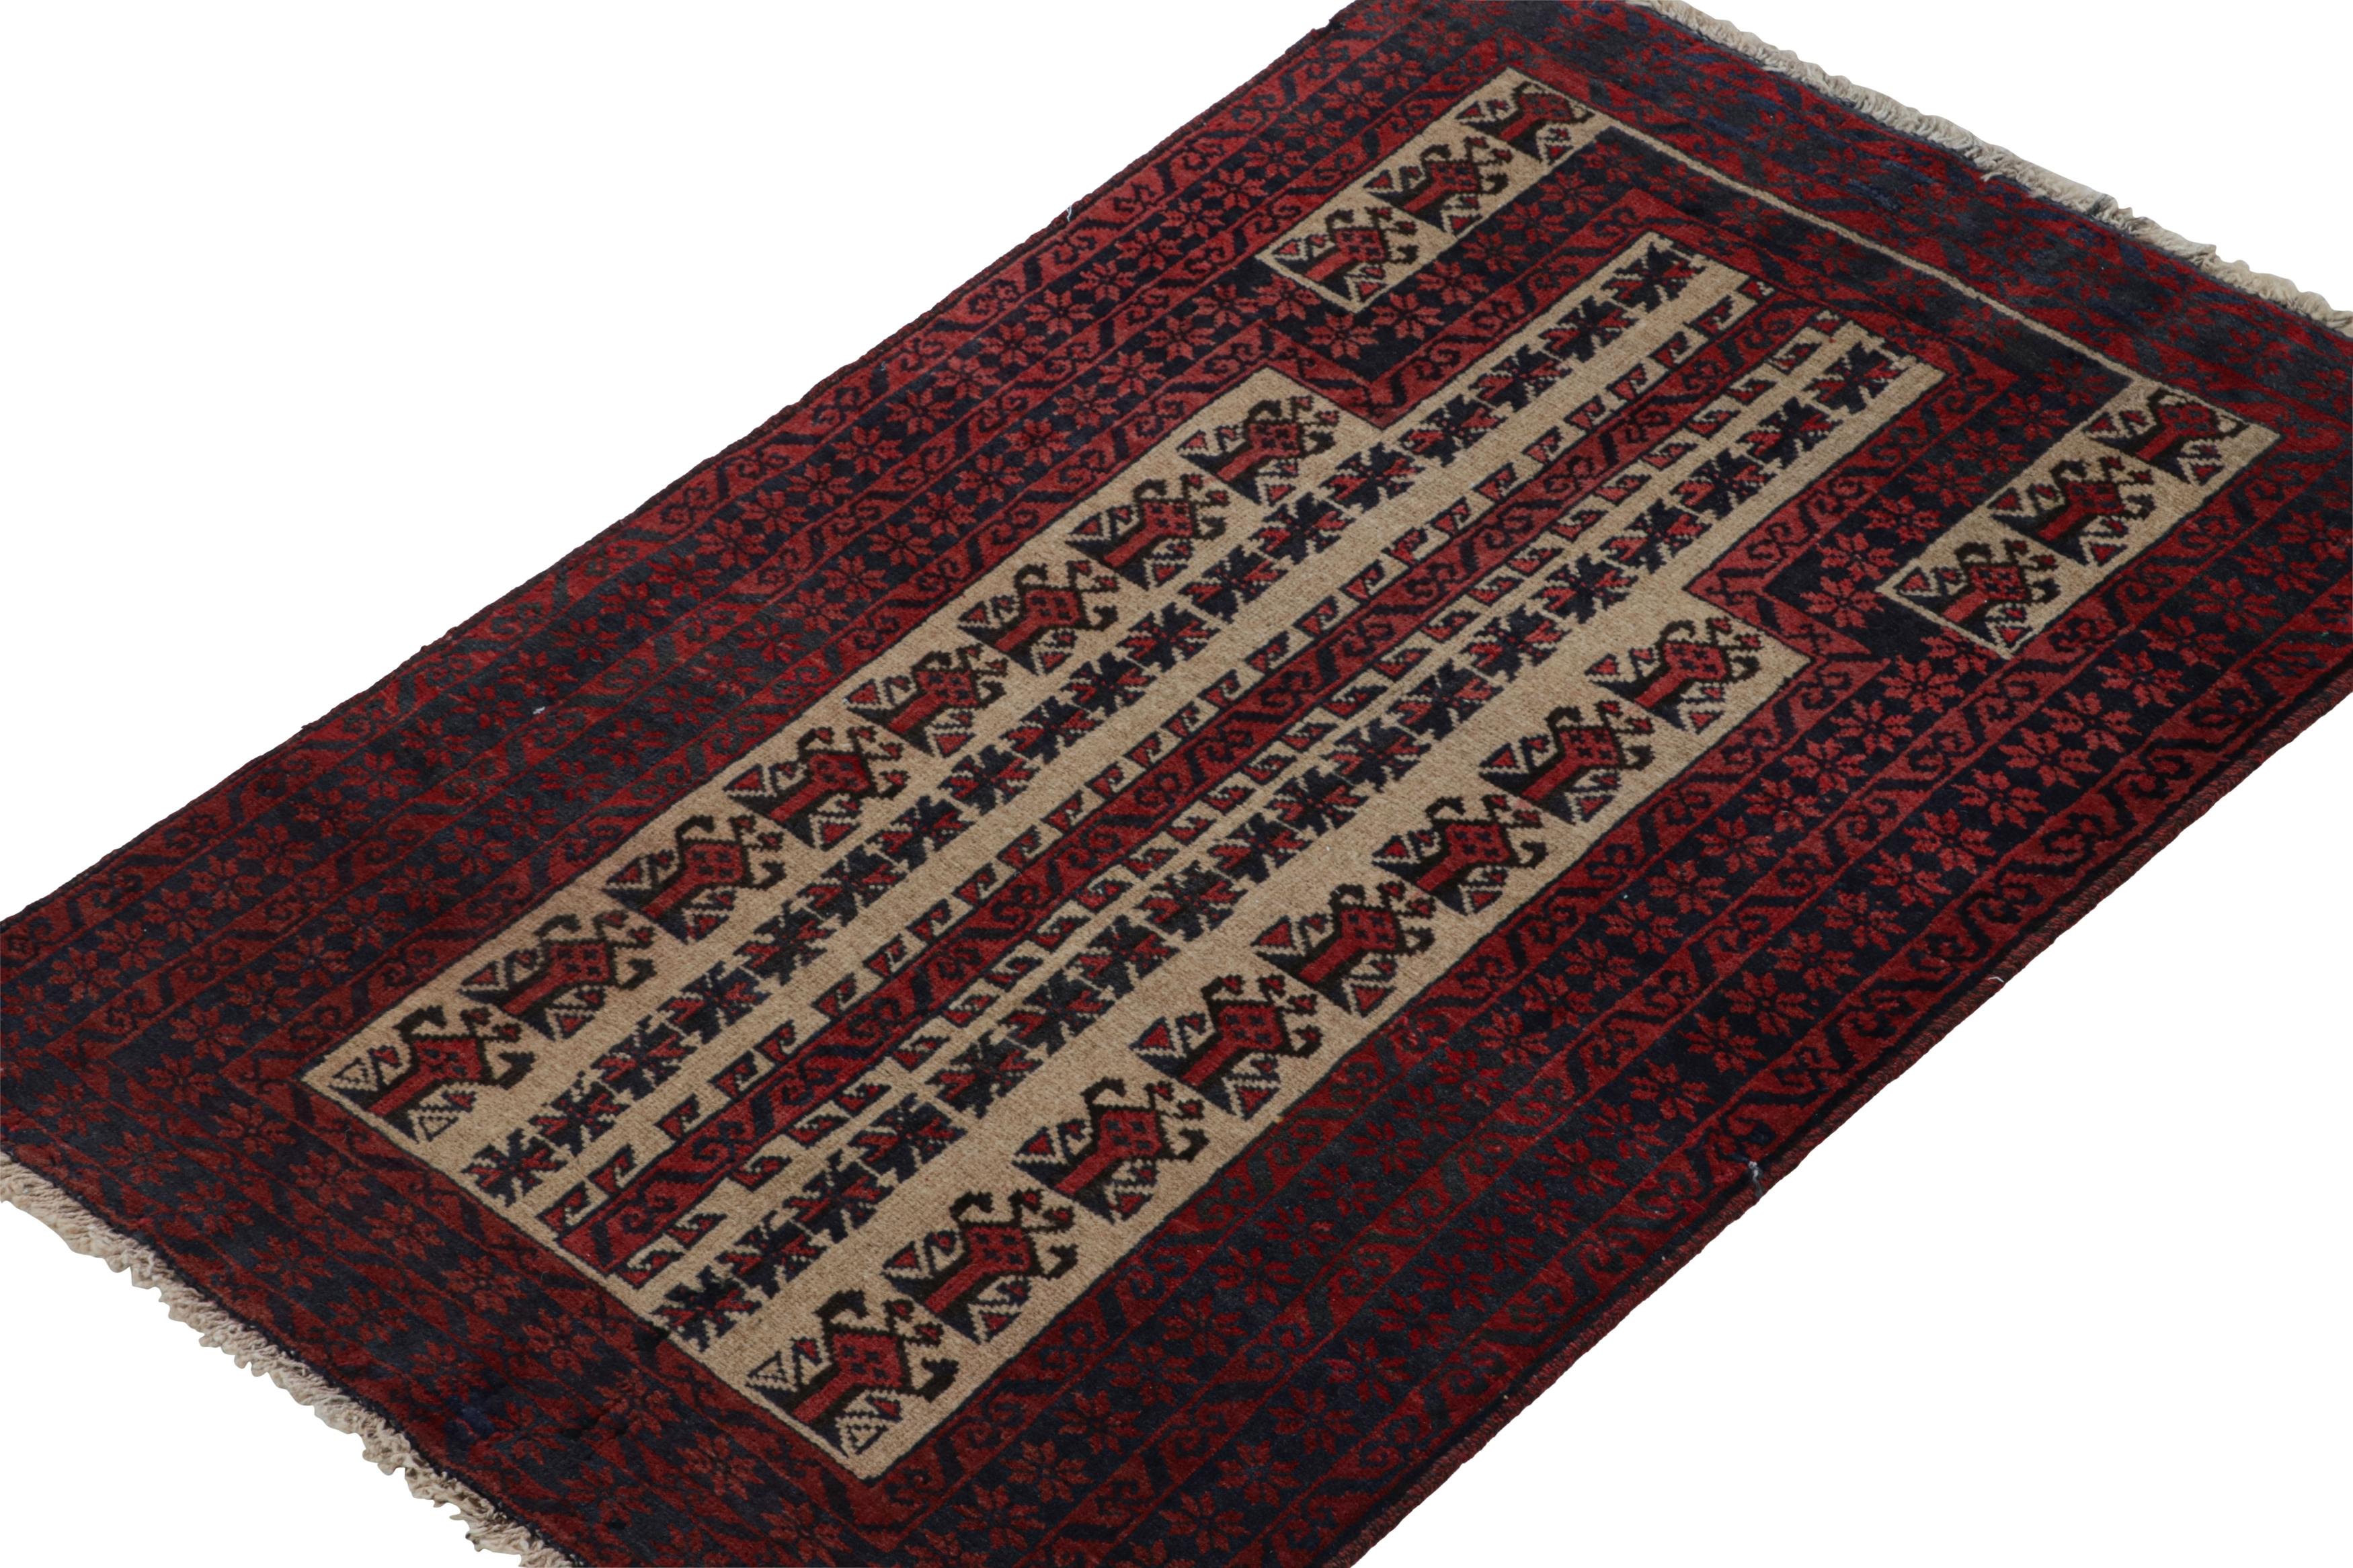 Hand-knotted in wool, this 3x4 Baluch Persian rug of the 1950s is the latest to enter Rug & Kilim’s Antique & Vintage collection.

On the Design:

The piece carries tribal patterns in rich tones of red, blue & beige. A keen eye will appreciate the